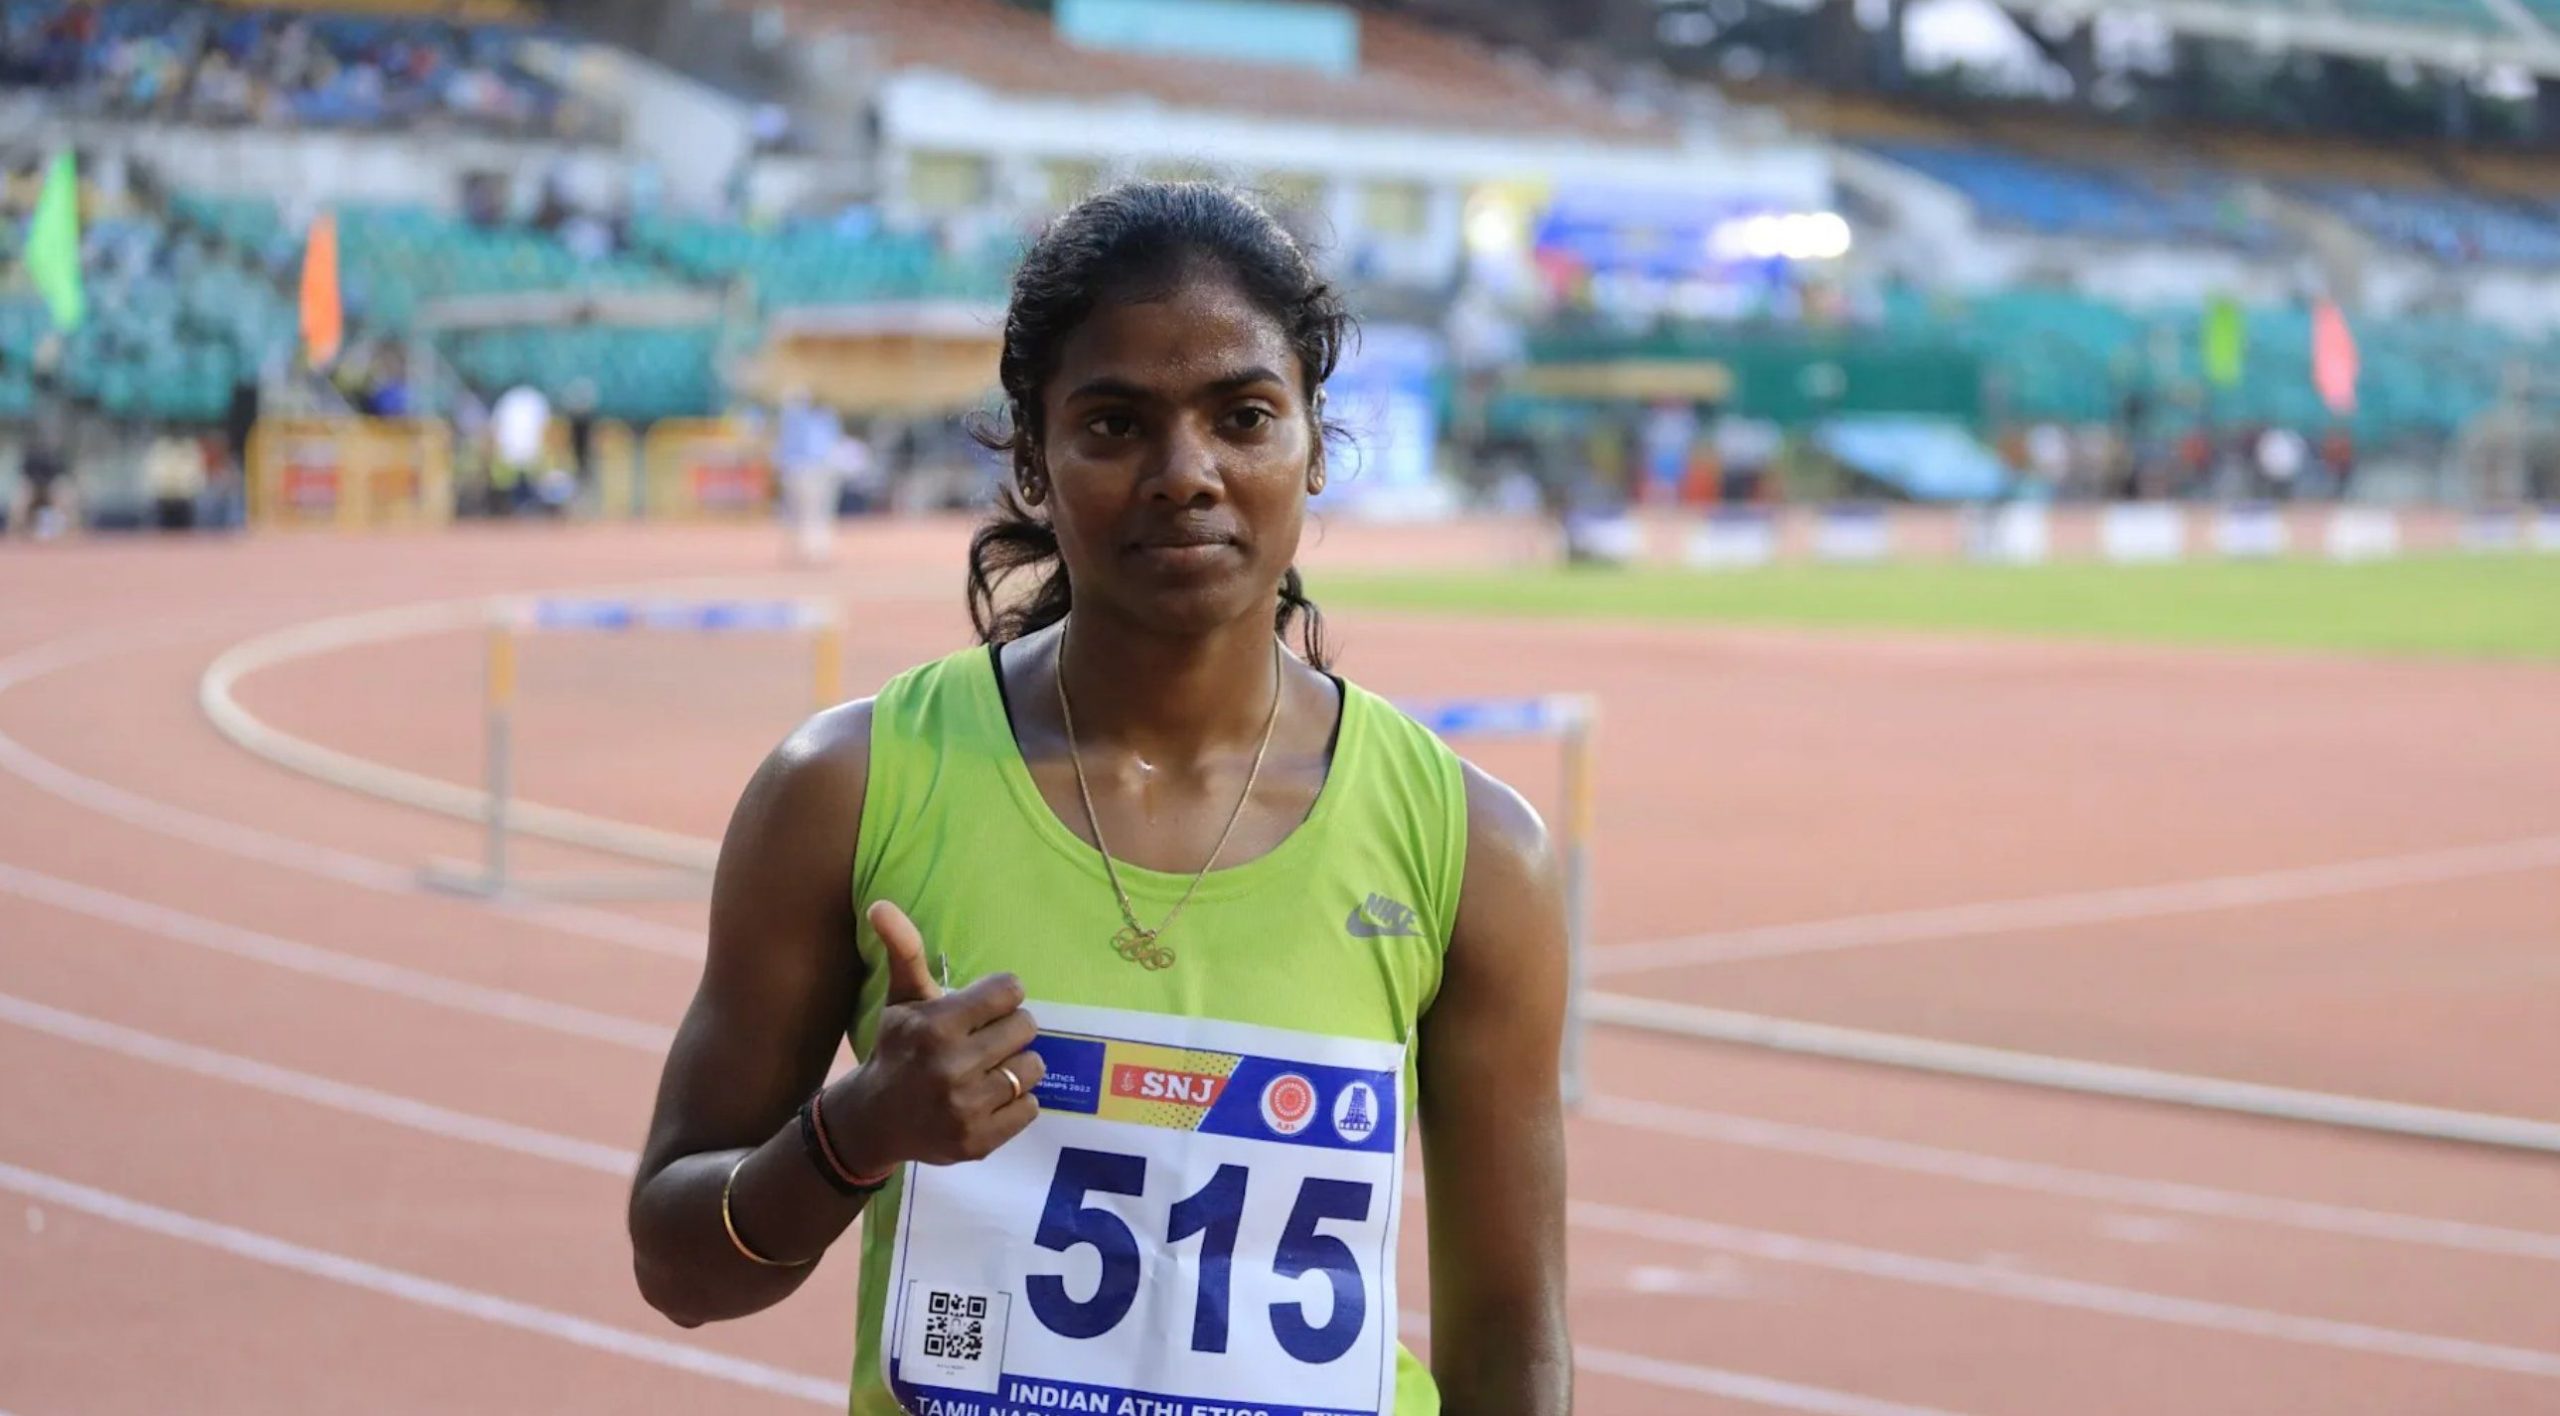 Dhanalakshmi Sekar forced to withdraw from World Athletics Championships 2022 due to visa blunder